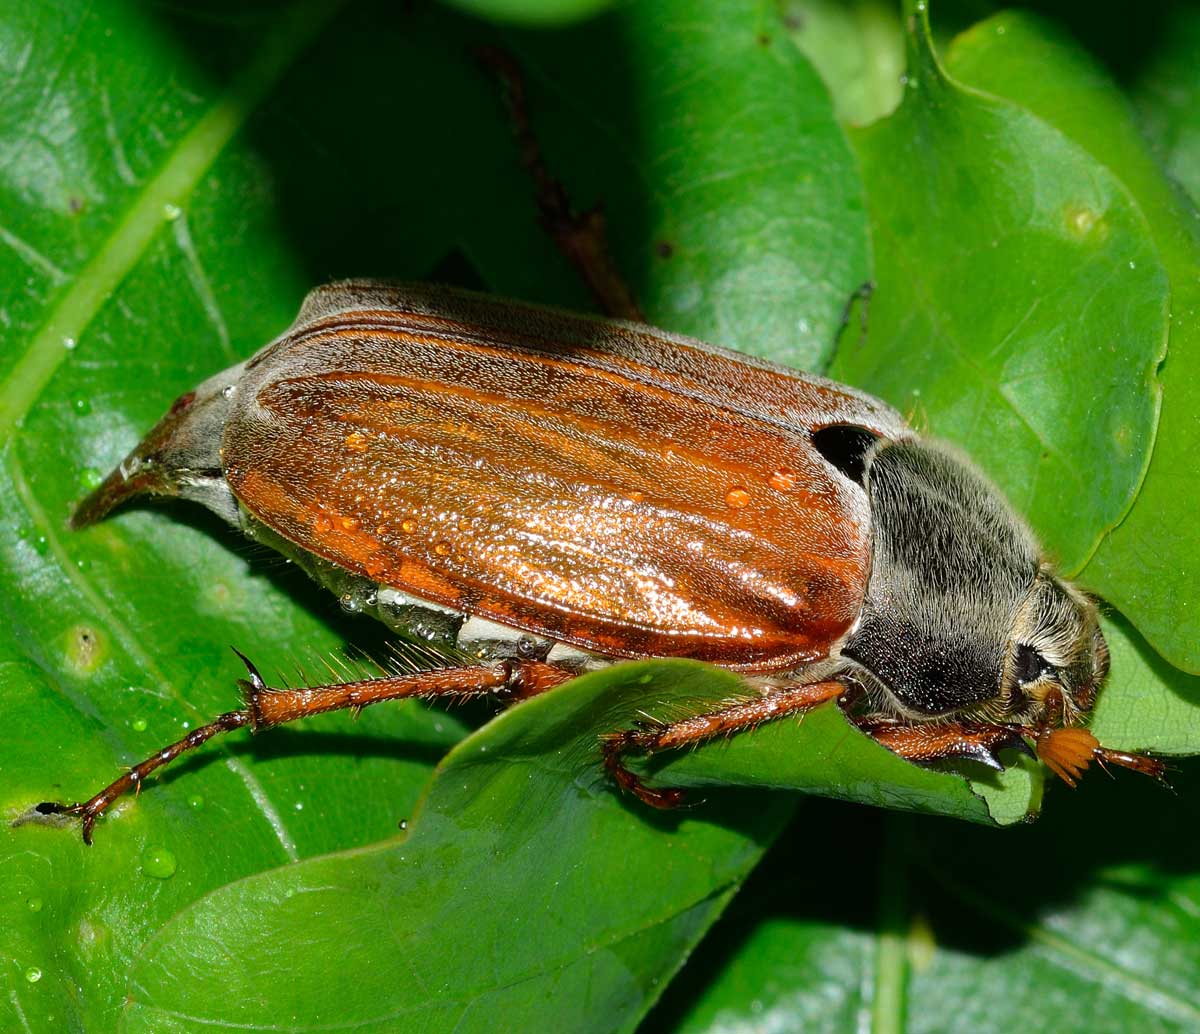 Maggiolino: Melolontha melolontha, Melolonthidae